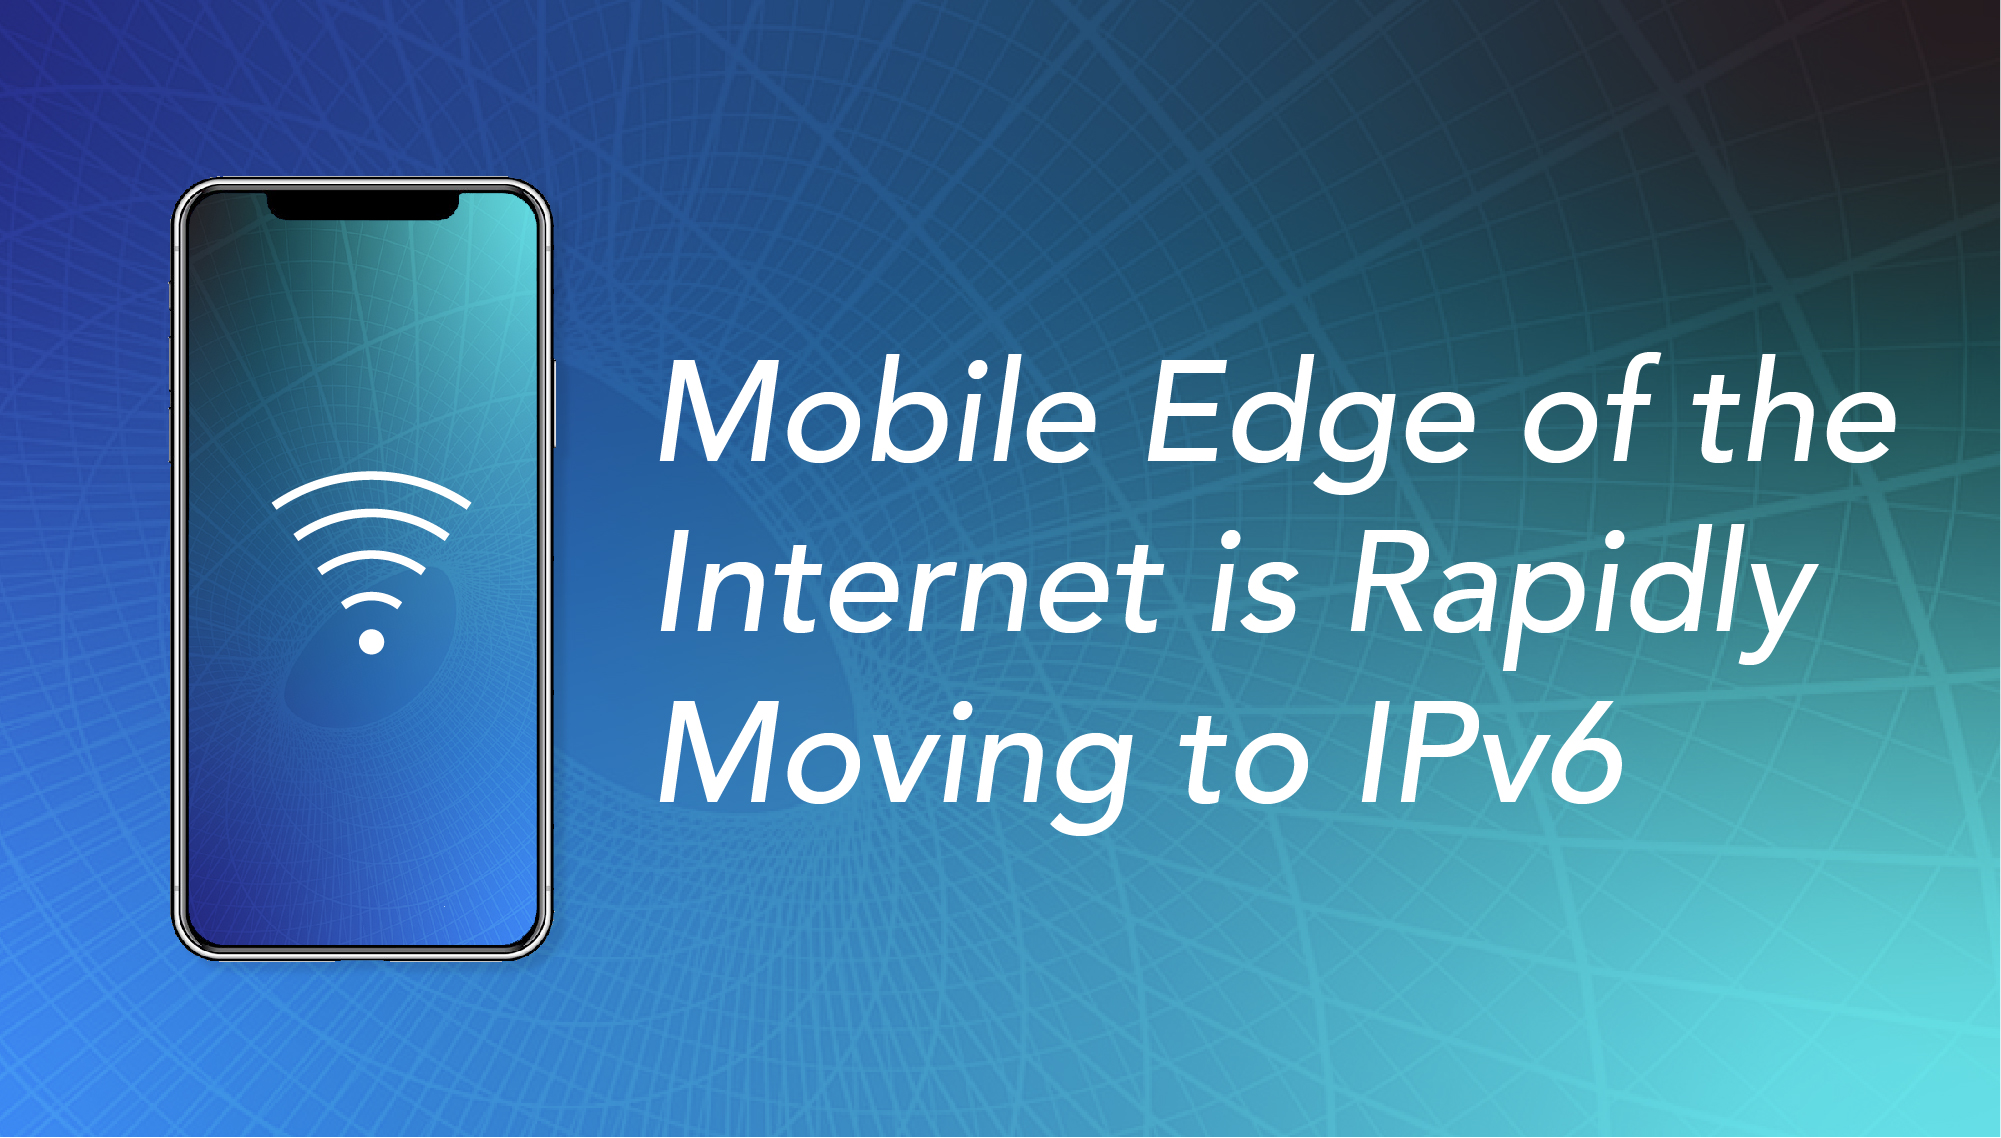 Mobile Edge of the Internet is Rapidly Moving to IPv6